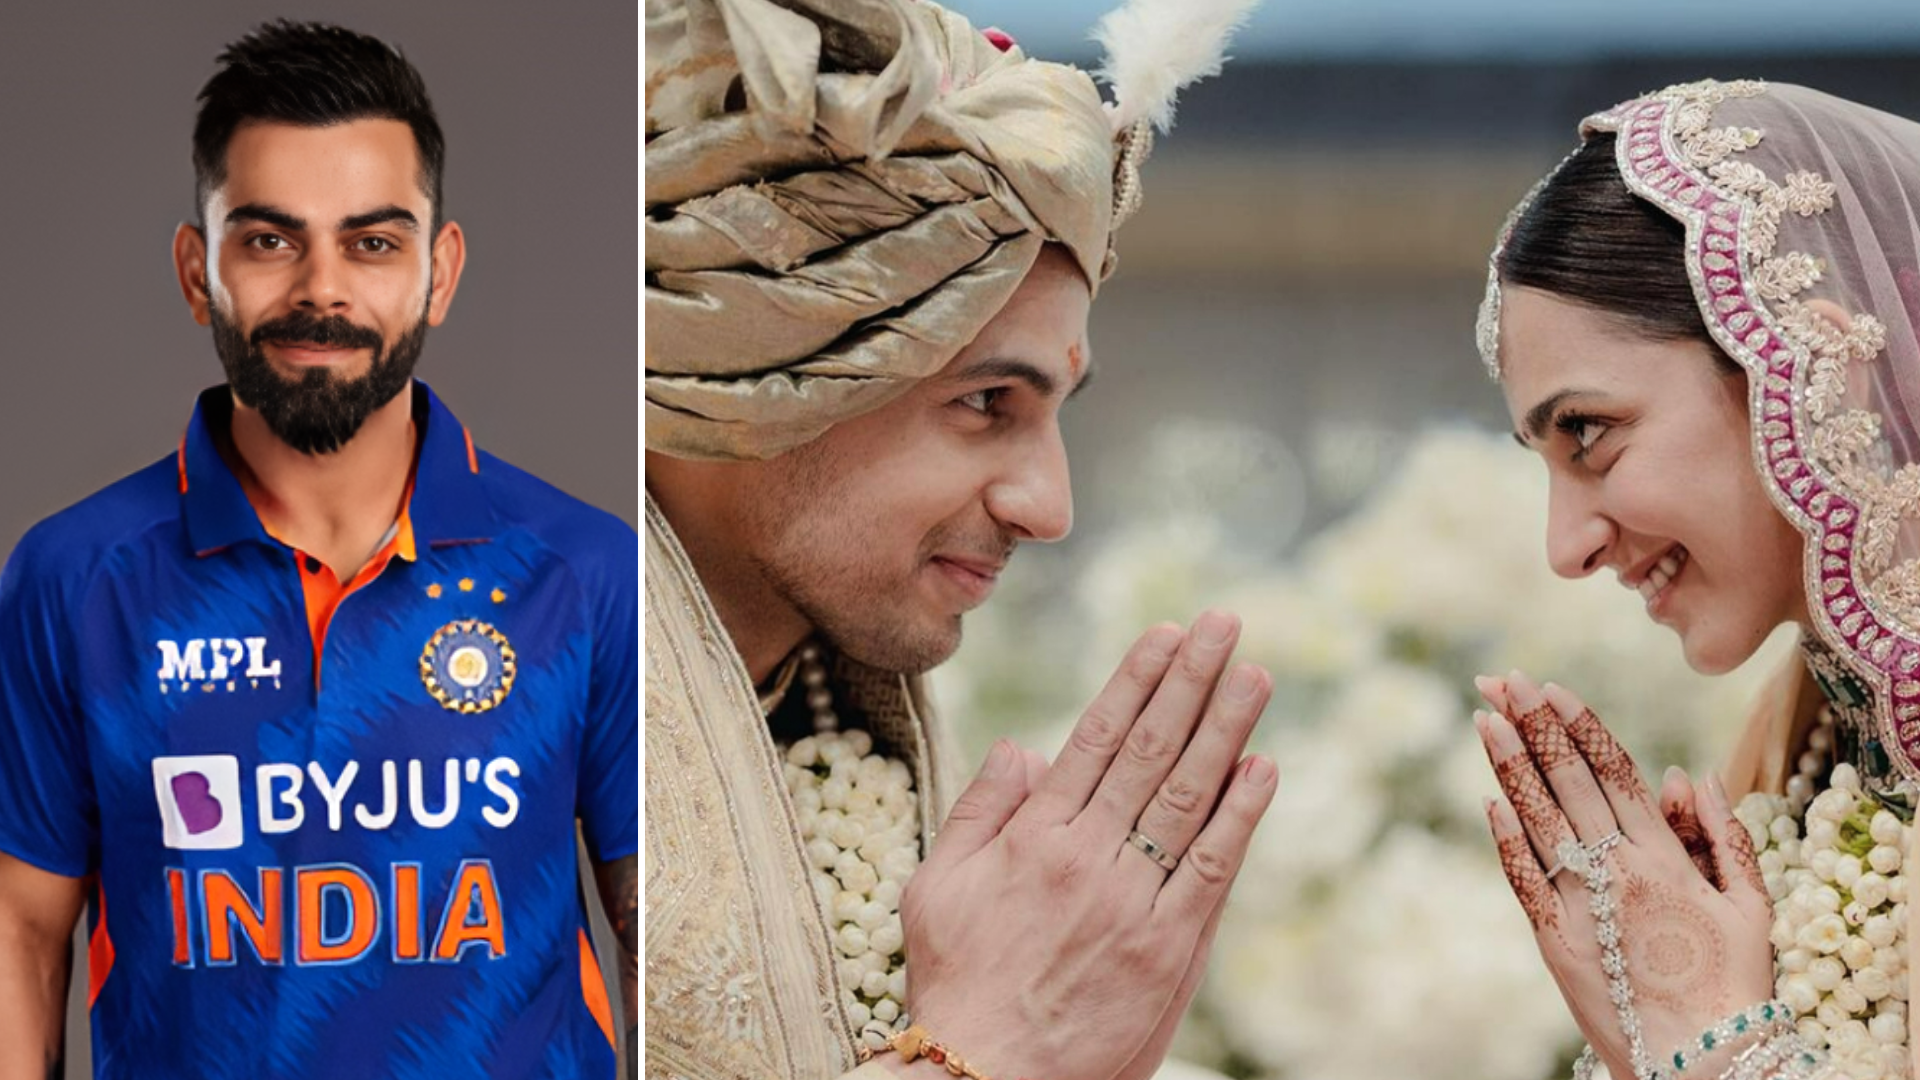 Virat Kohli’s Instagram Post Of Winning T20 World Cup Is NOW The Most Liked Photo In India Dethroning Sid-Kiara’s Wedding Pic